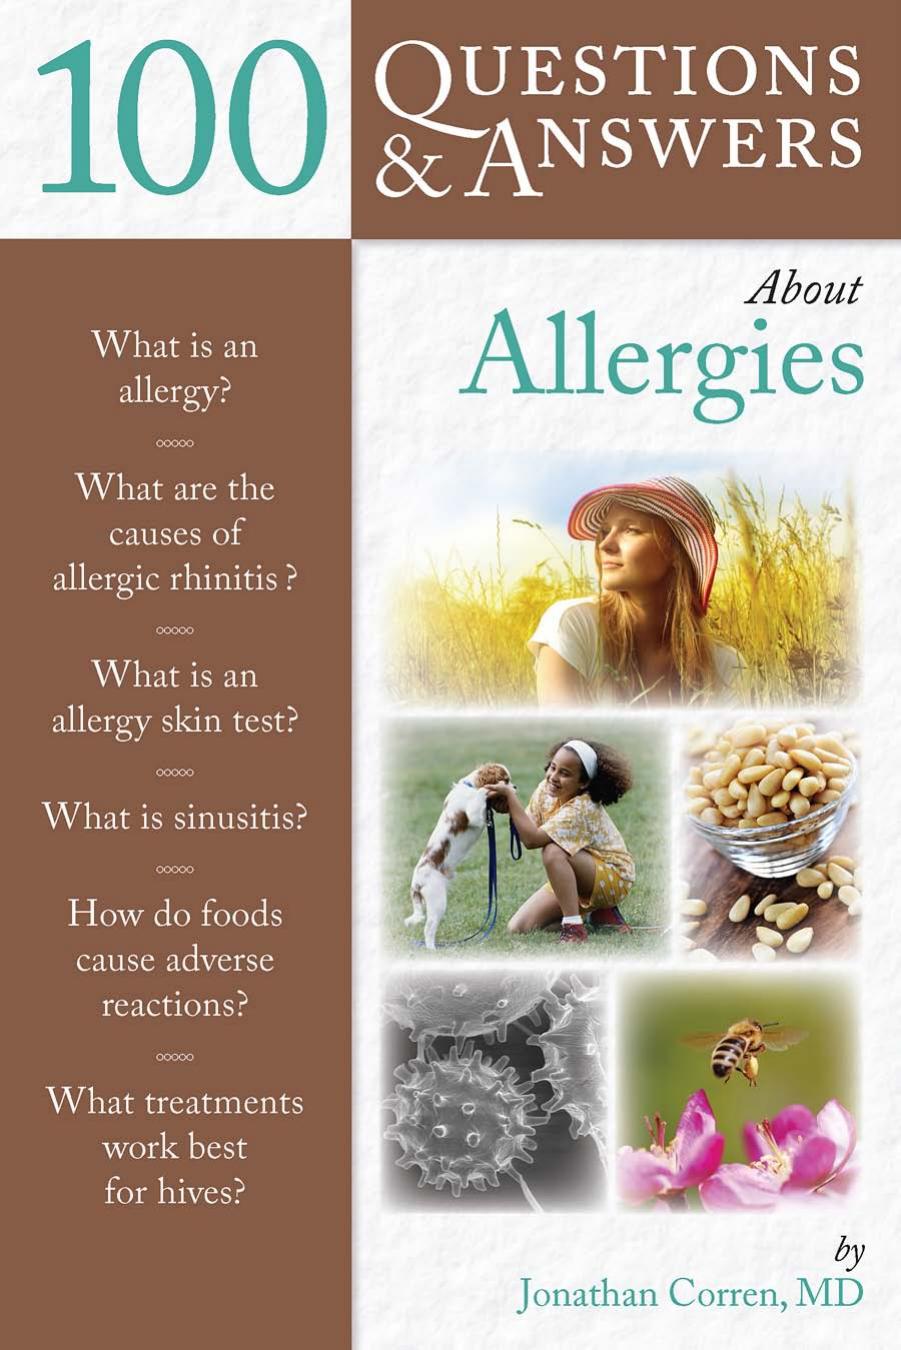 100 Questions and Answers About Allergies.jpg